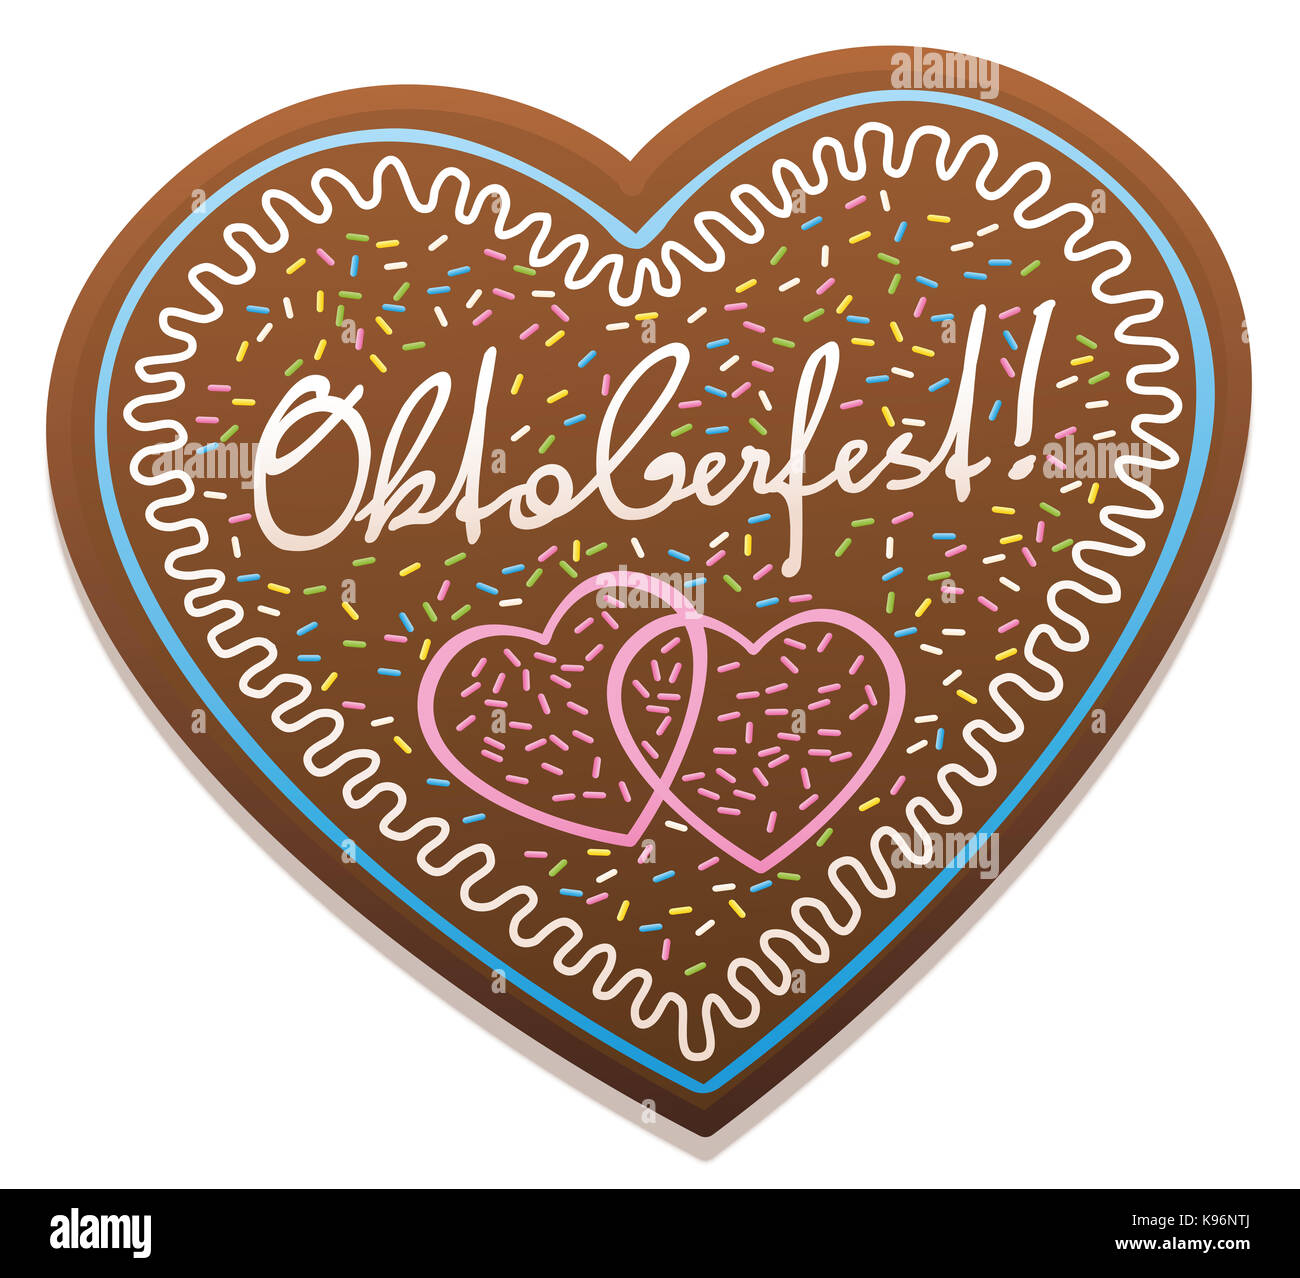 Oktoberfest gingerbread heart - typical sweet german souvenir from munich.  Illustration on white background. Stock Photo